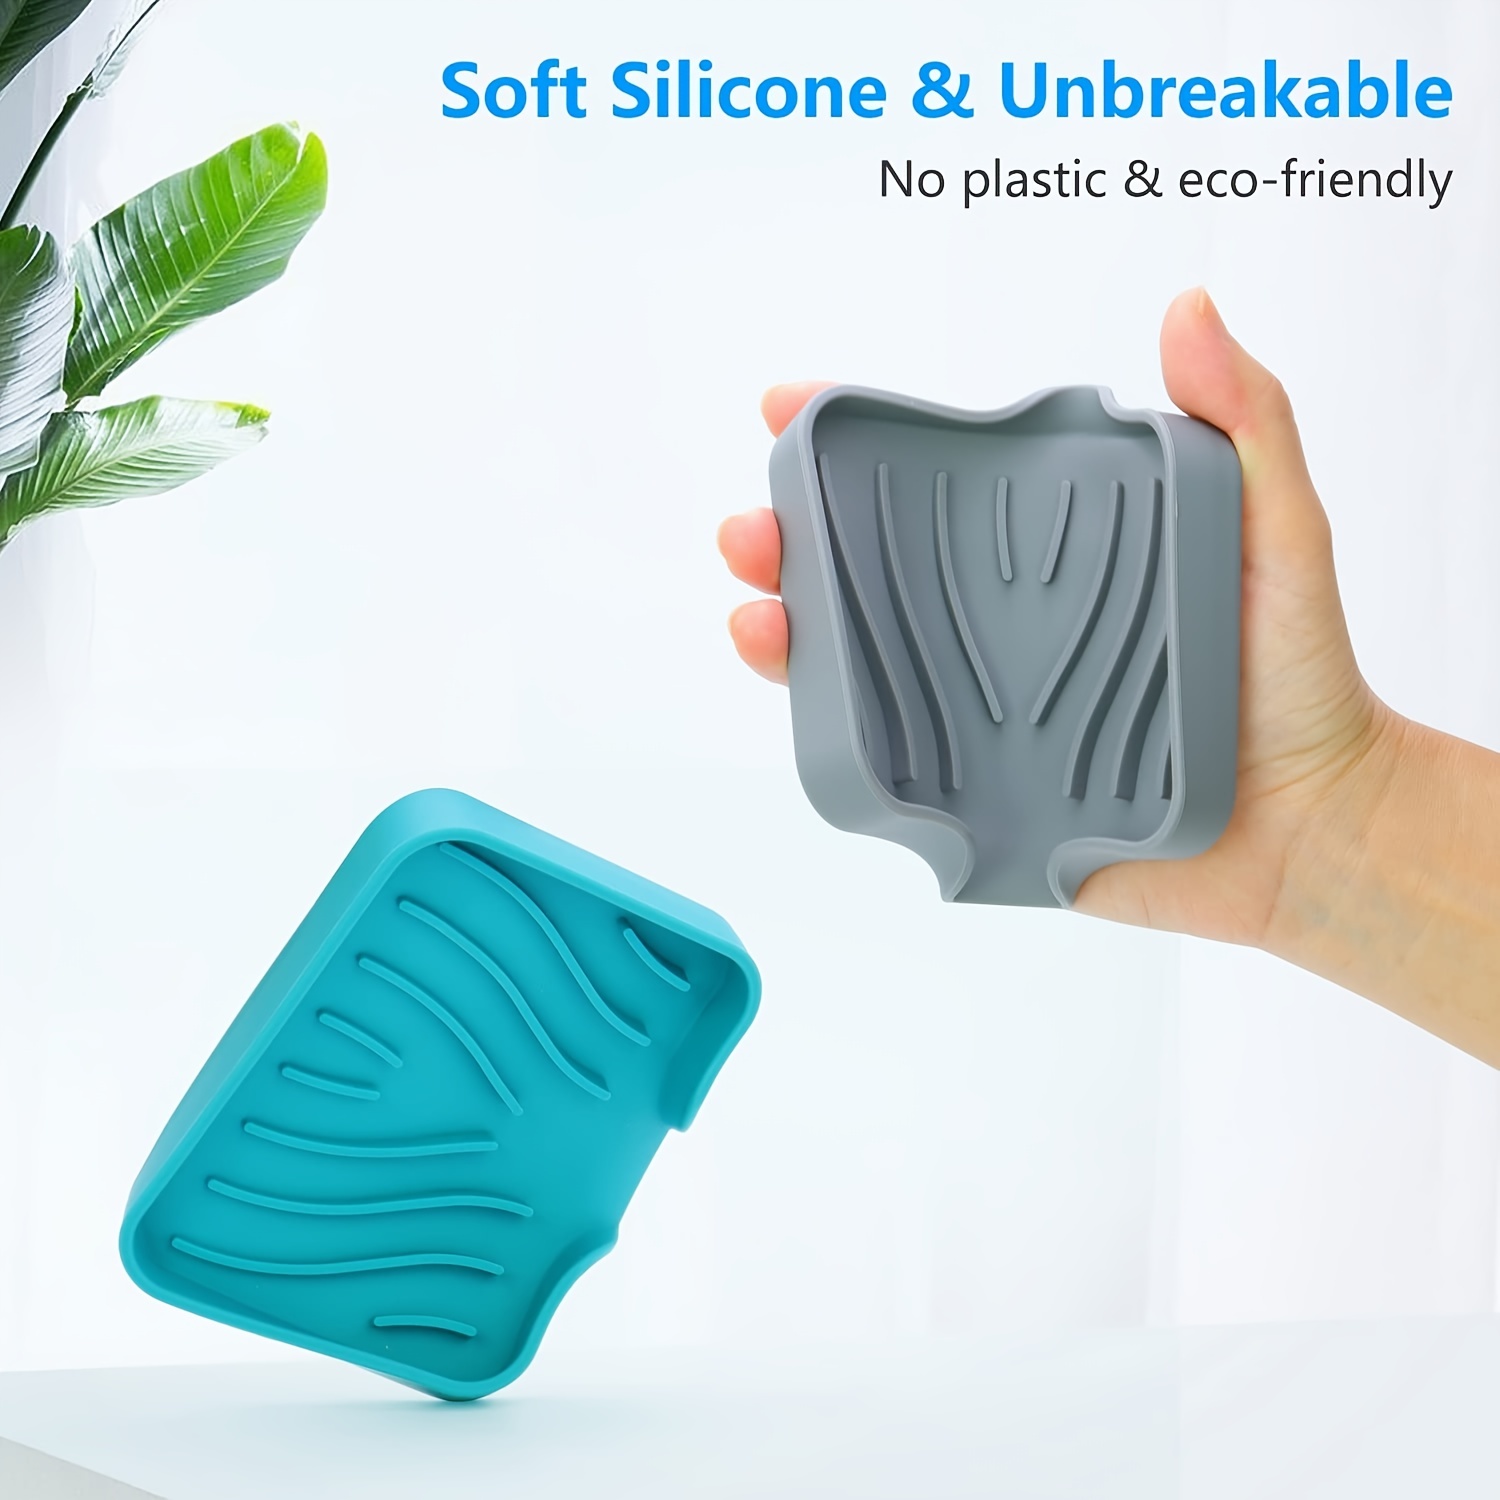 Self Draining Soap Dishes, Premium Soap Holder, Soap Tray Saver for Shower Bathroom Kitchen Sponges, Non-Slip Design, Bar Soap Dish to Keep Soap Dry (